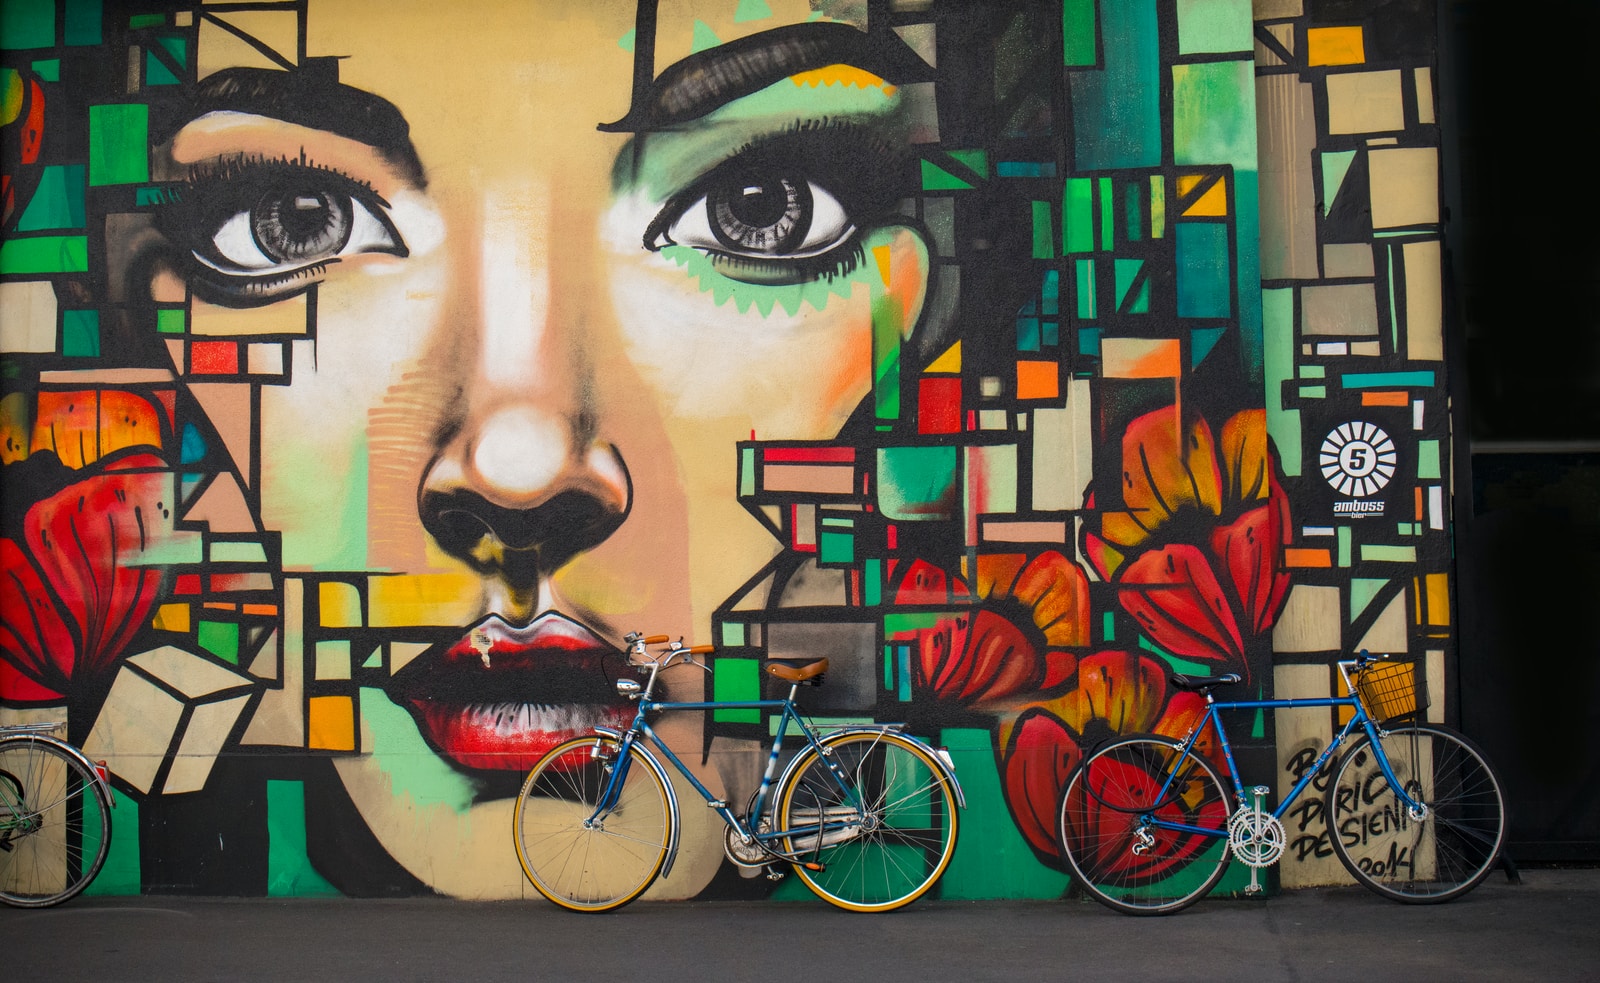 two blue cruiser bicycles on graffiti wall